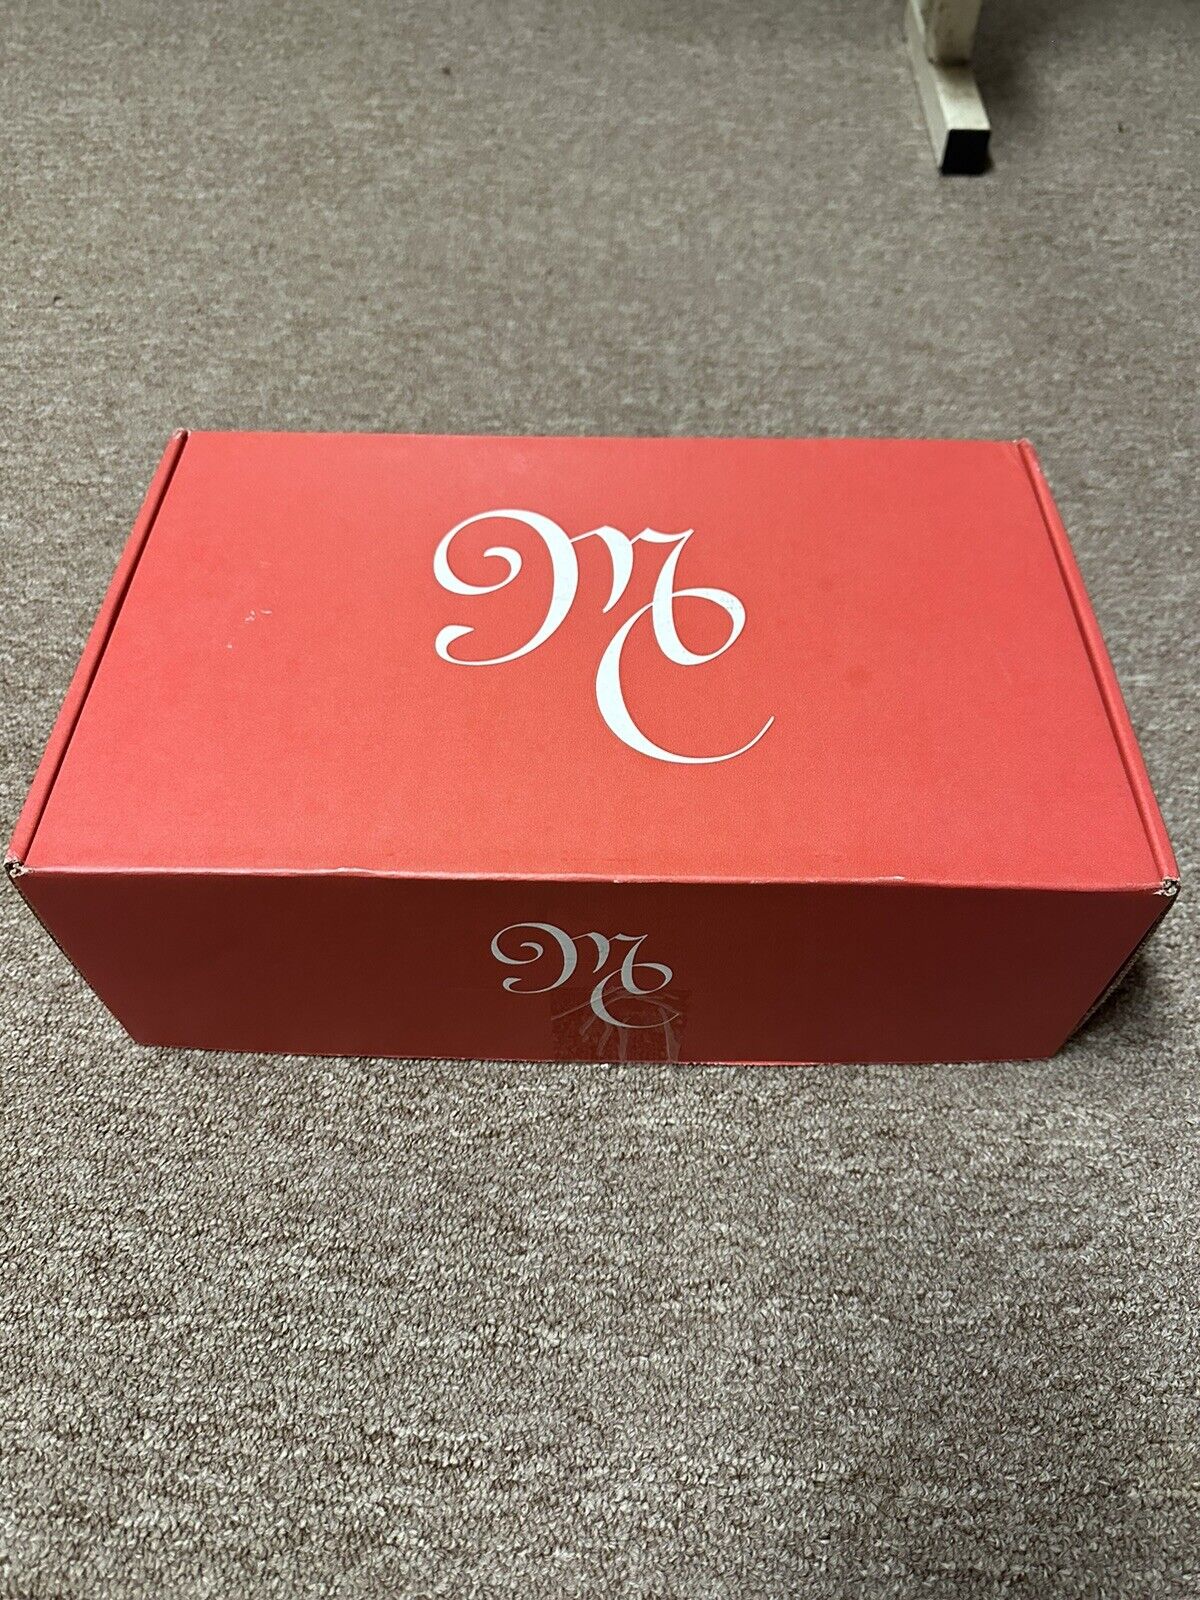 Mariah Carey 2021 Holiday Crate Very Rare Brand New Untouched